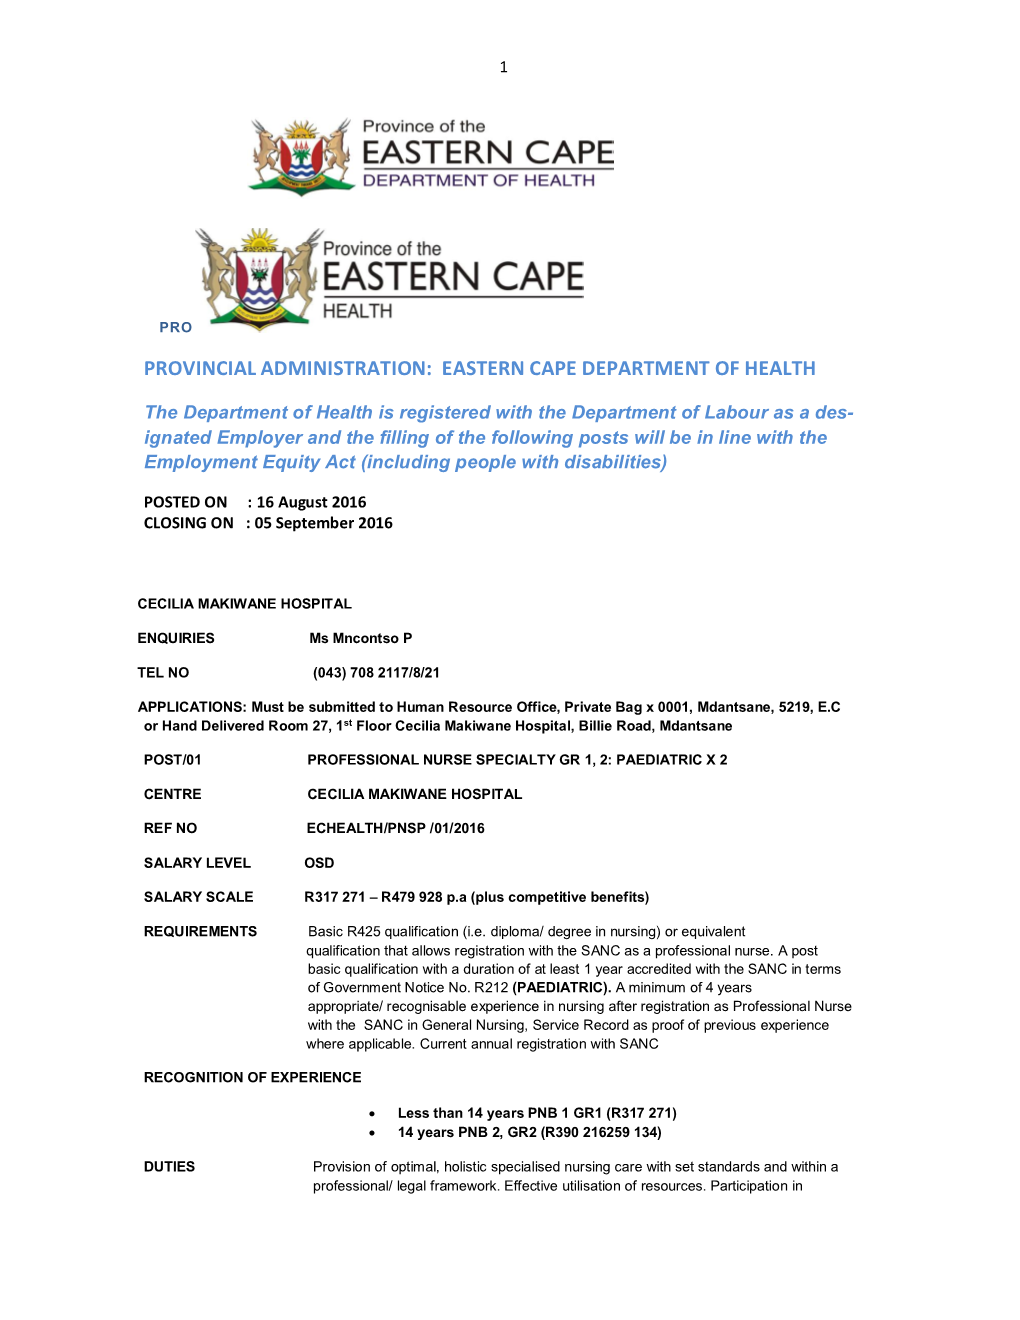 Provincial Administration: Eastern Cape Department of Health